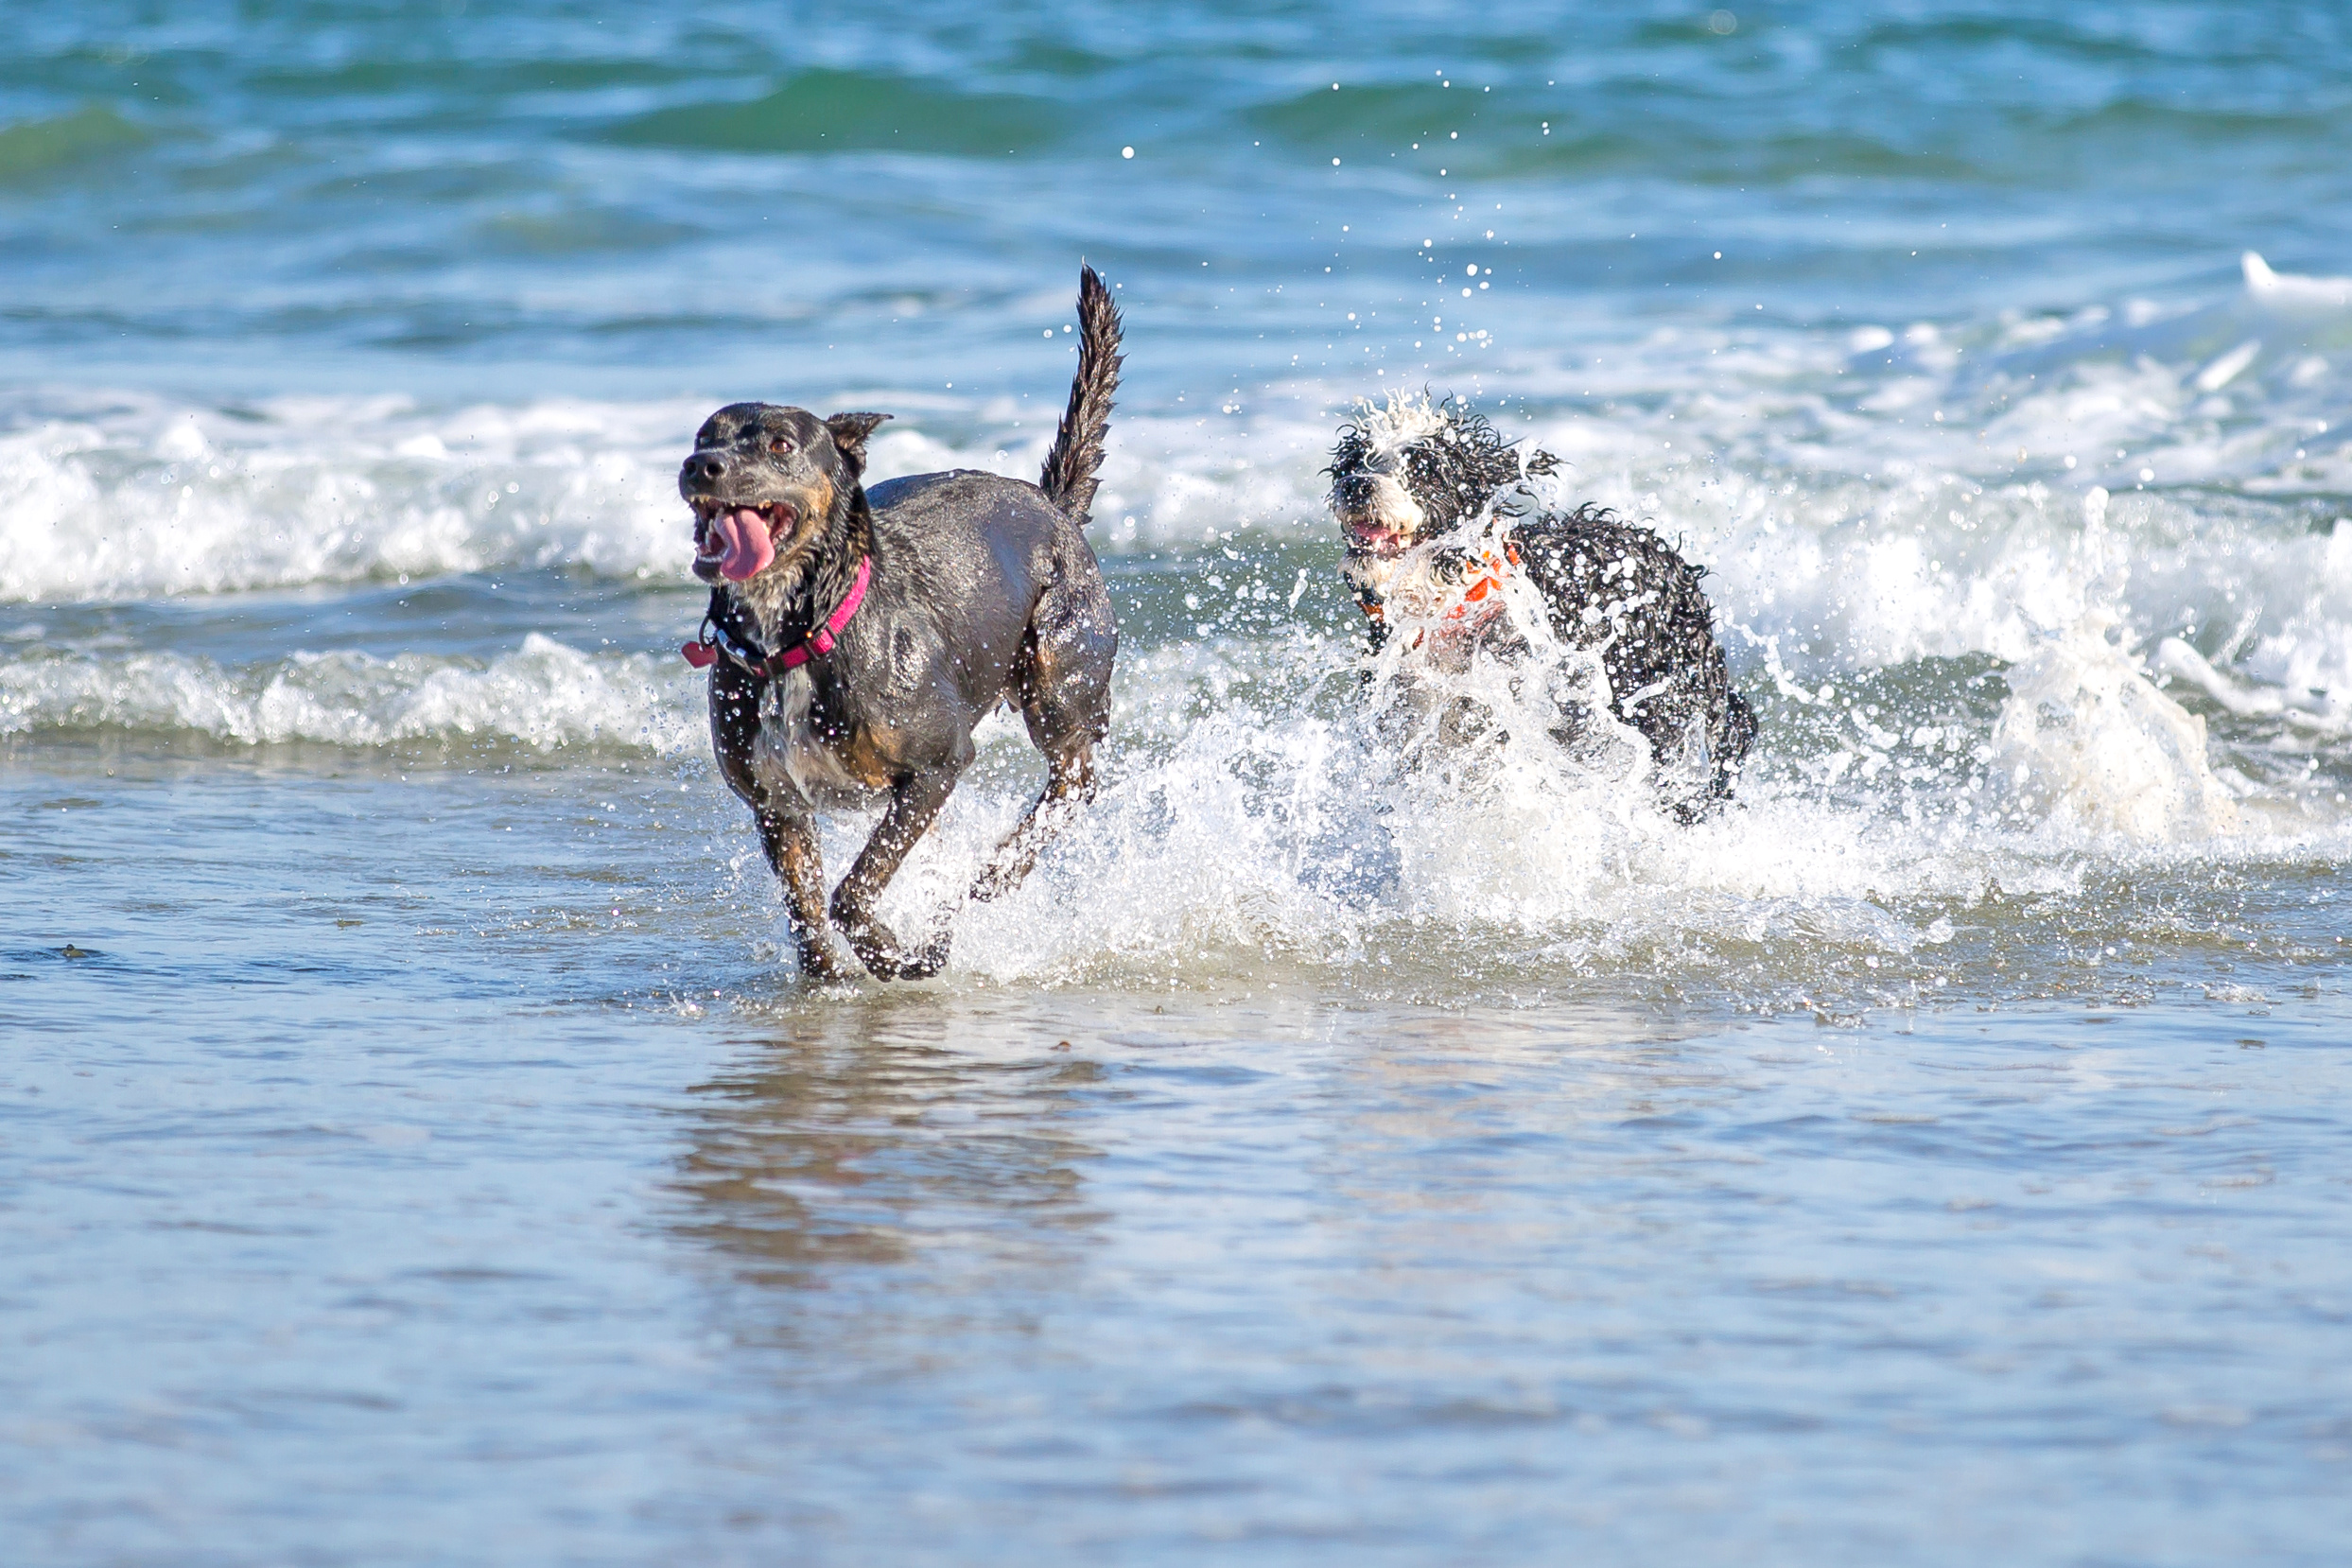 Fido and friends can frolic with abandon at Dog Beach in Bonita